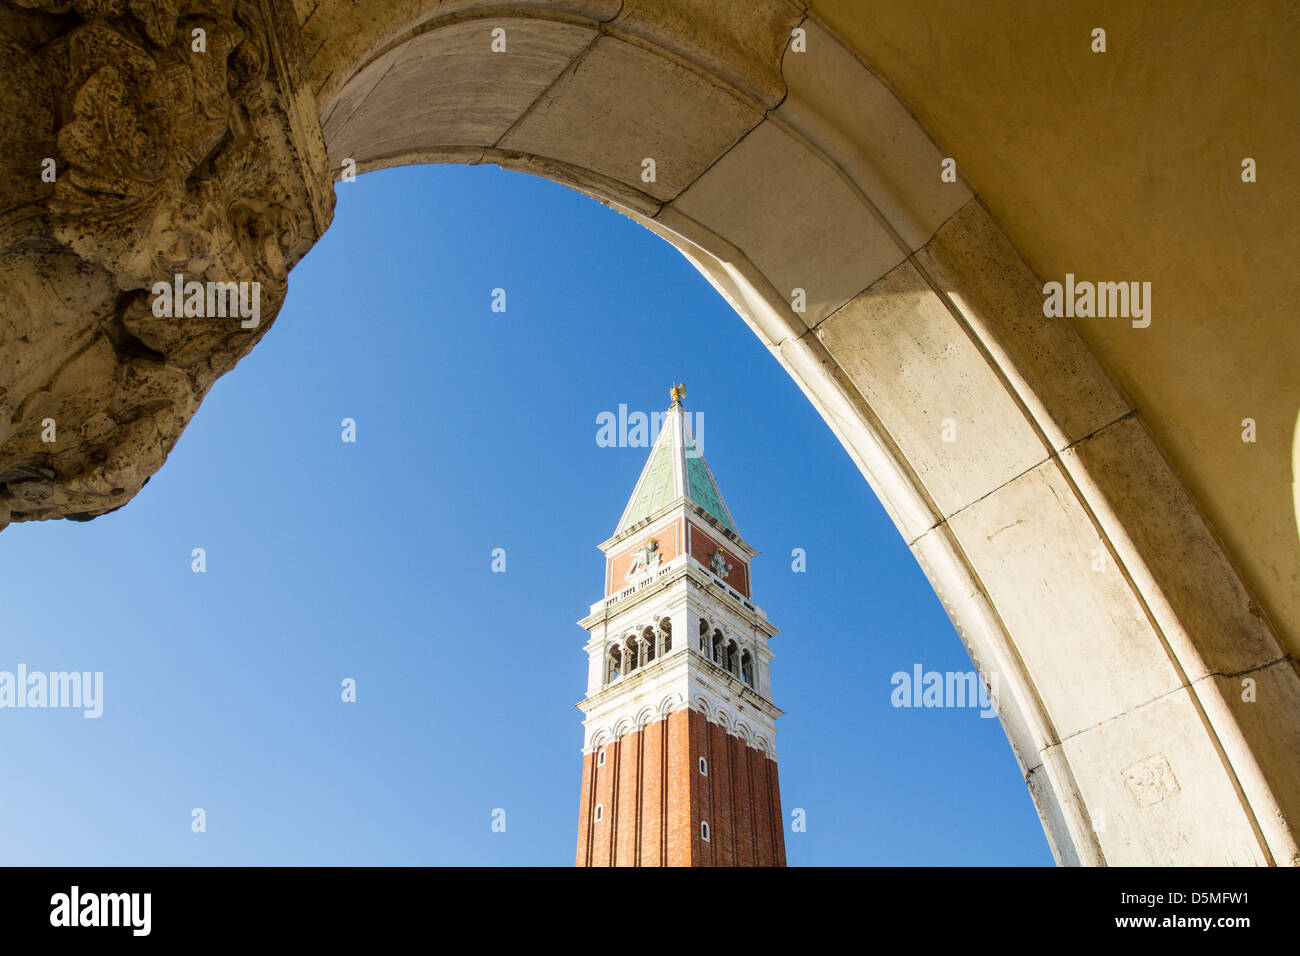 Saint Mark Campanile (Campanile di San Marco) viewed from the arches of Doge's Palace (Palazzo Ducale). Stock Photo